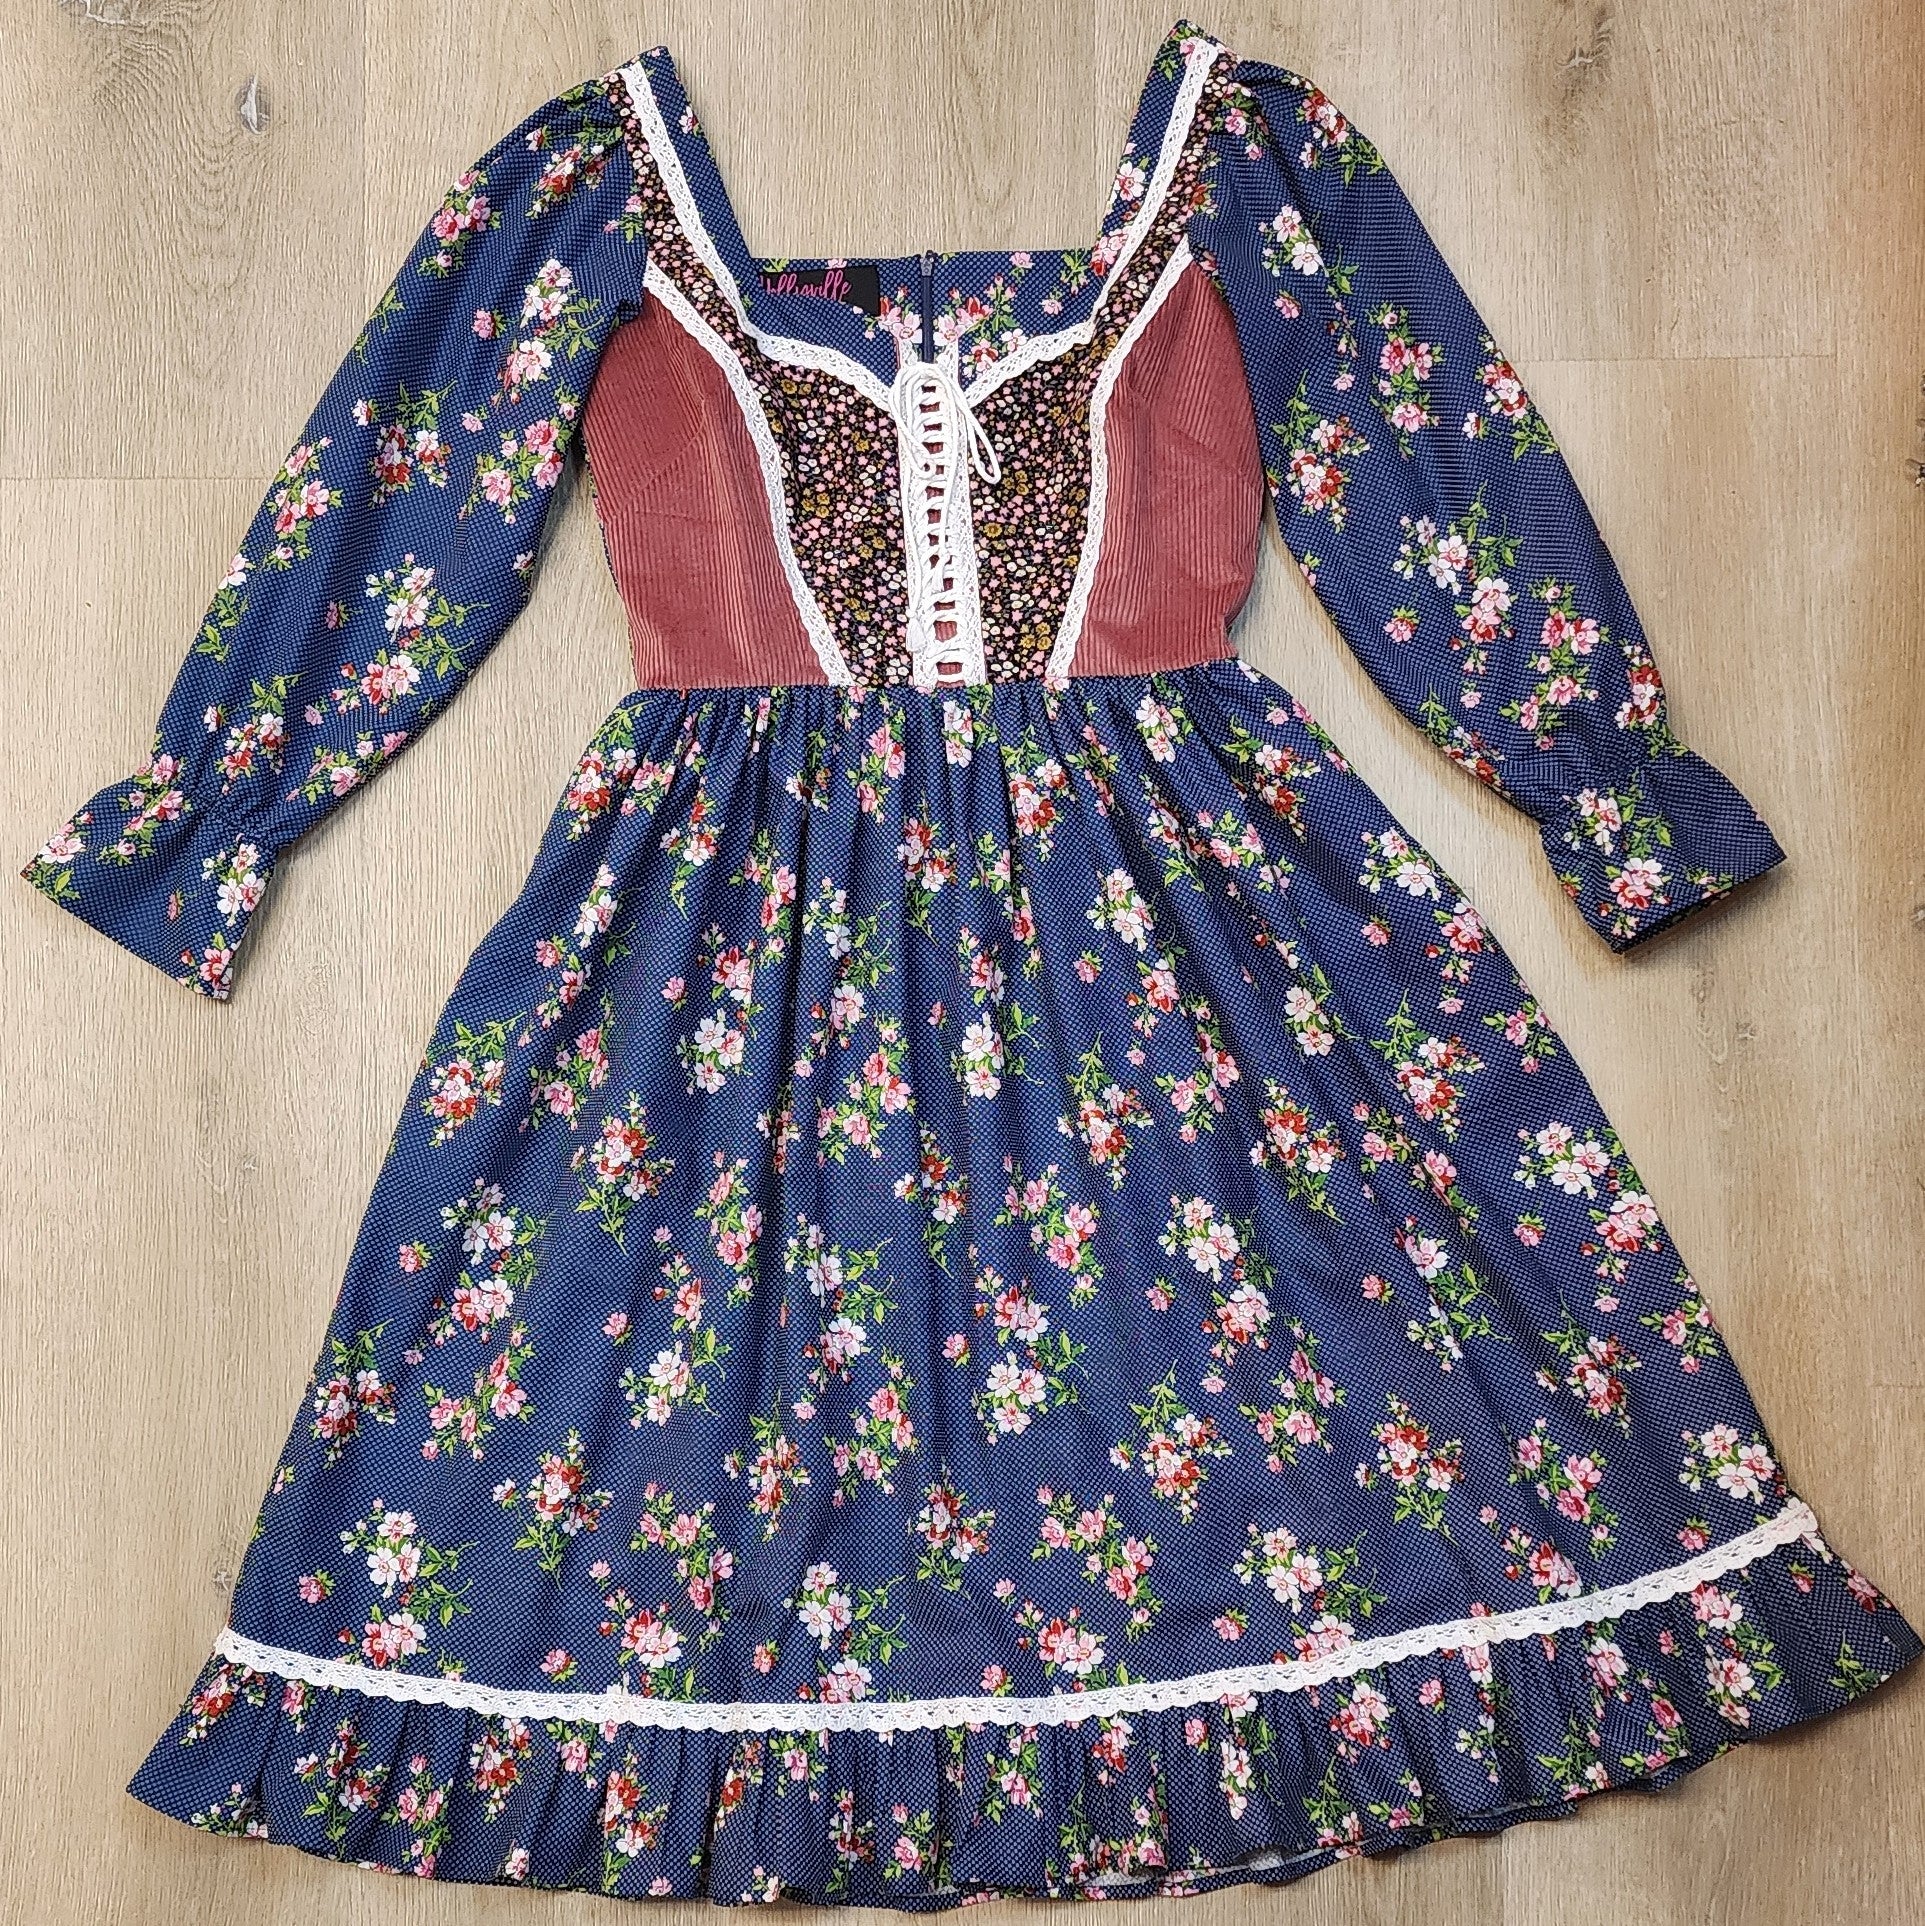 1970s vintage inspired Gunne Sax floral corduroy corset dress by Hollyville